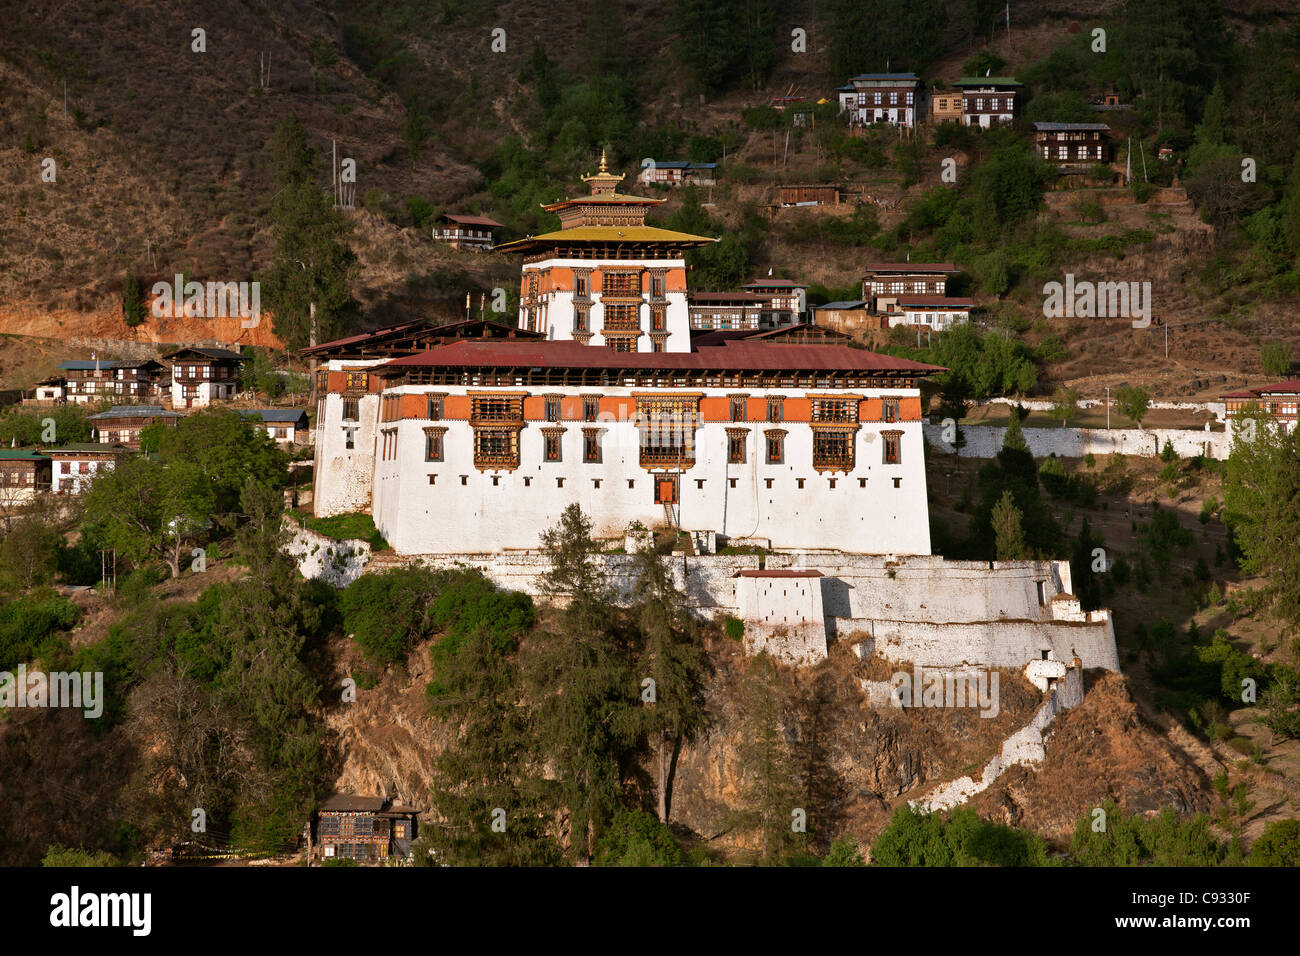 The very impressive 16th century Paro Dzong and its round watchtower, now a national museum. Stock Photo